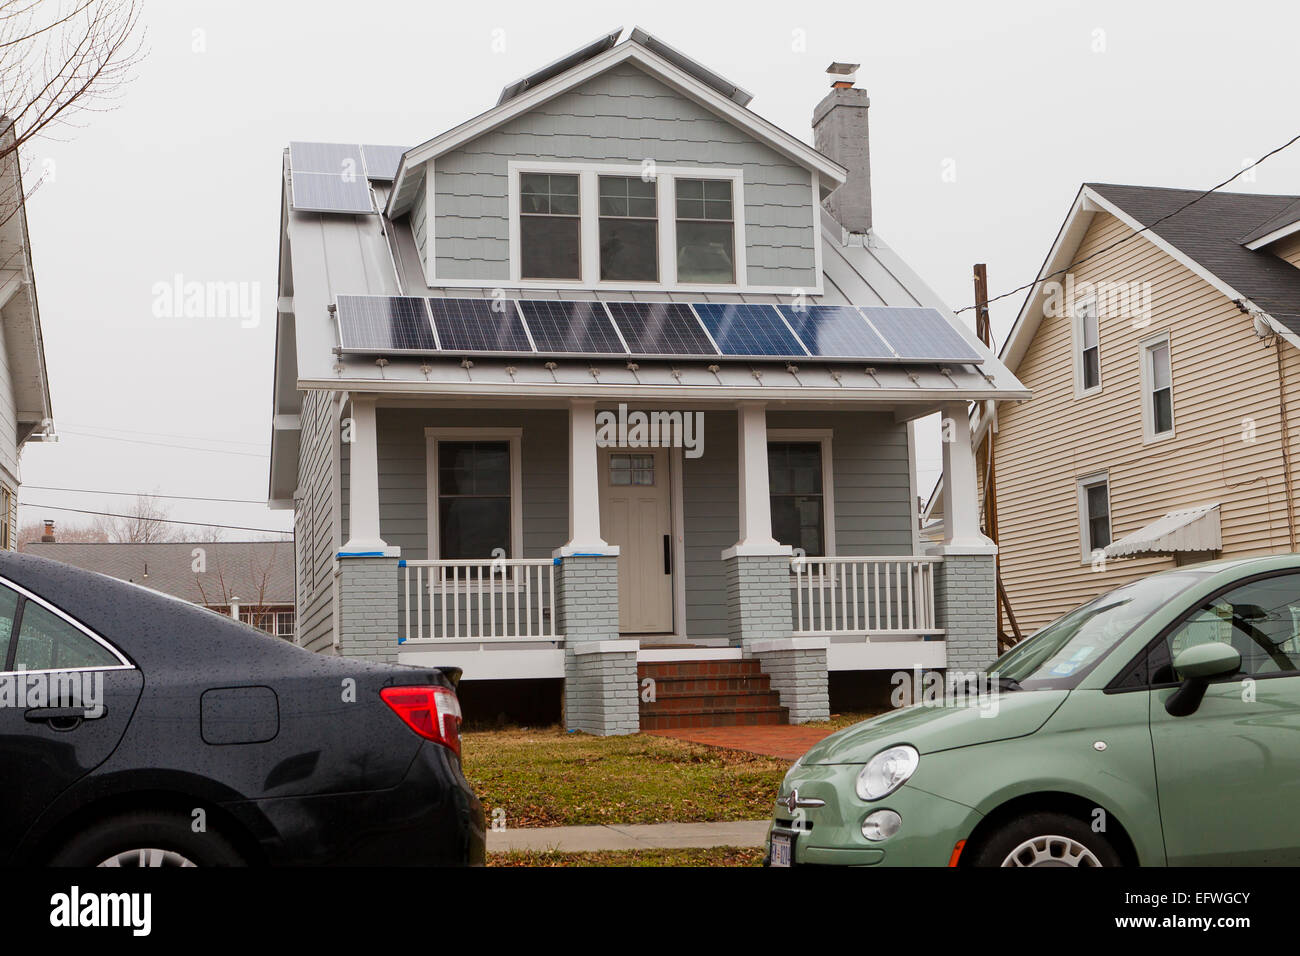 Solar panels on roof of small house - USA Stock Photo